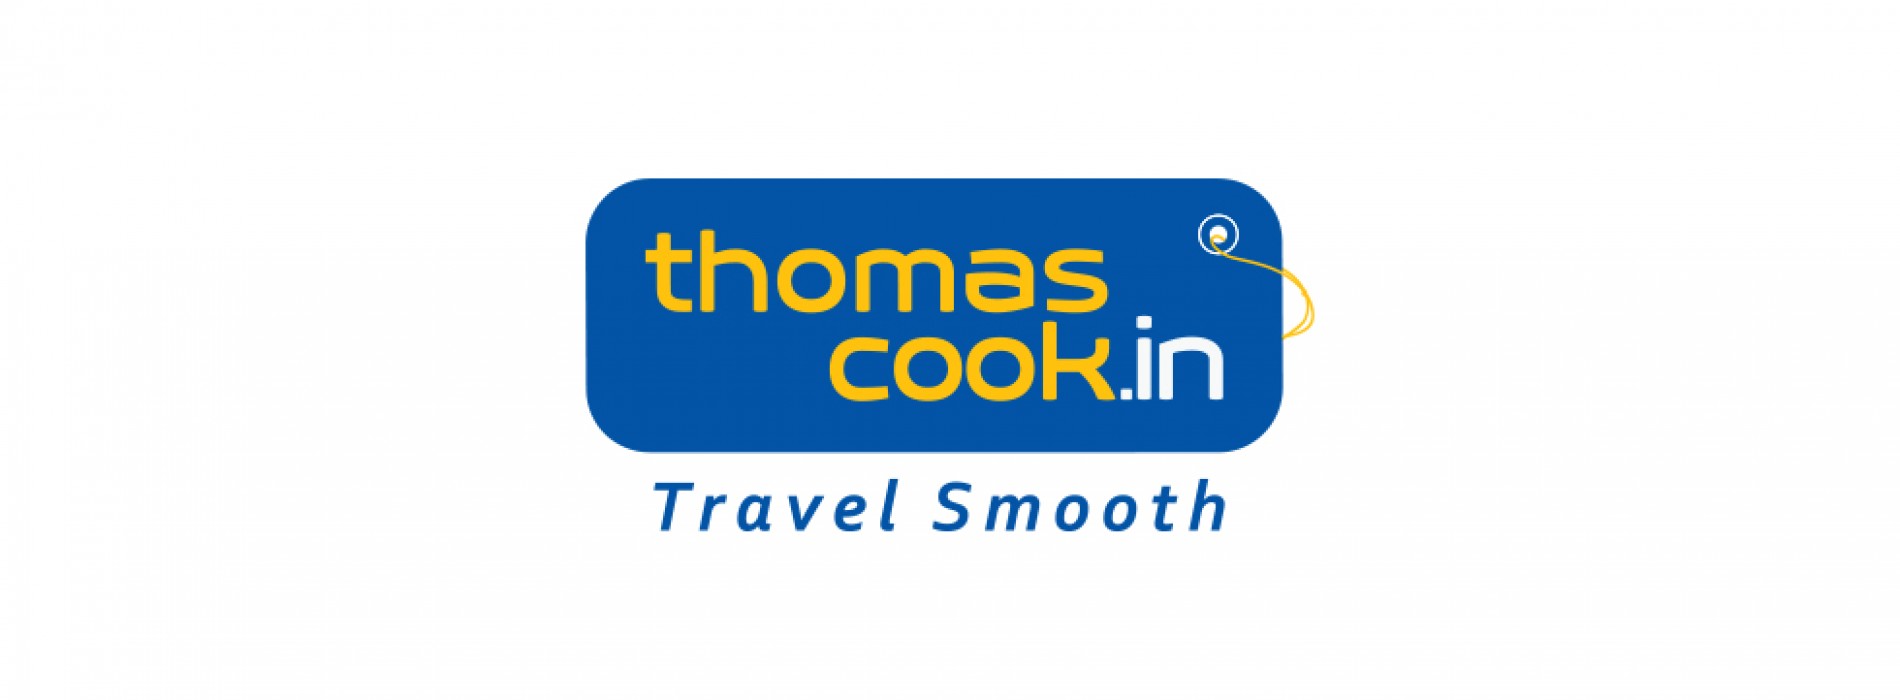 Thomas Cook India’s guide to the best retreat this Valentine’s Day